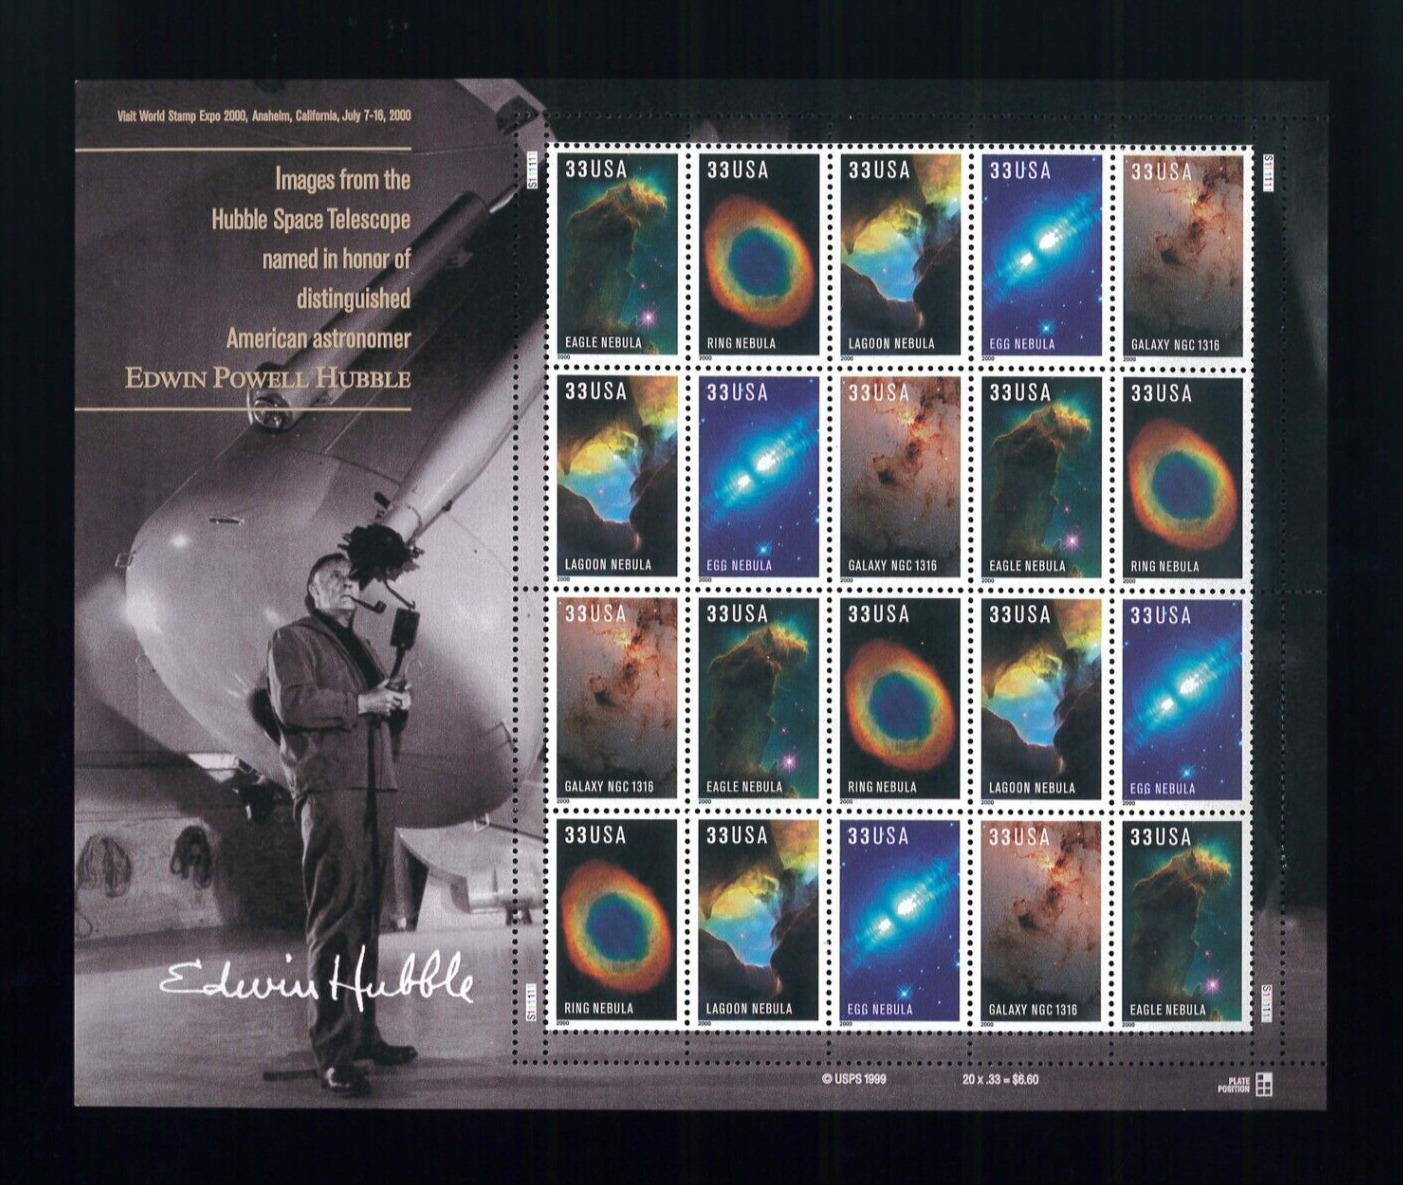 United States 32¢ Hubble Space Telescope Postage Stamp #3384-88 MNH Full Sheet